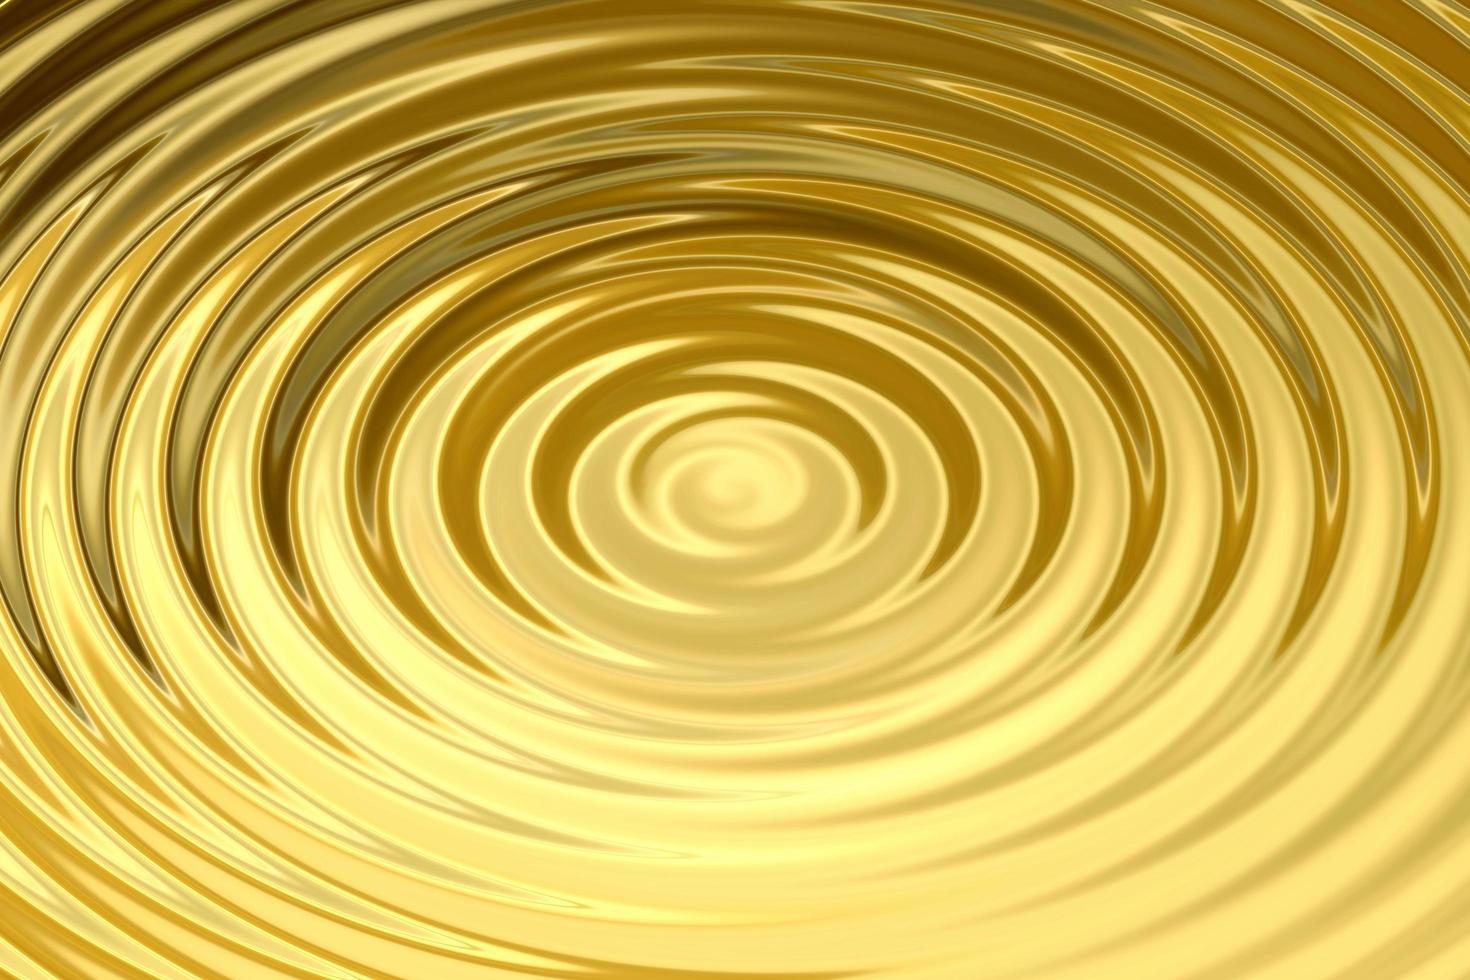 Glowing gold water ring with liquid ripple, abstract background texture photo